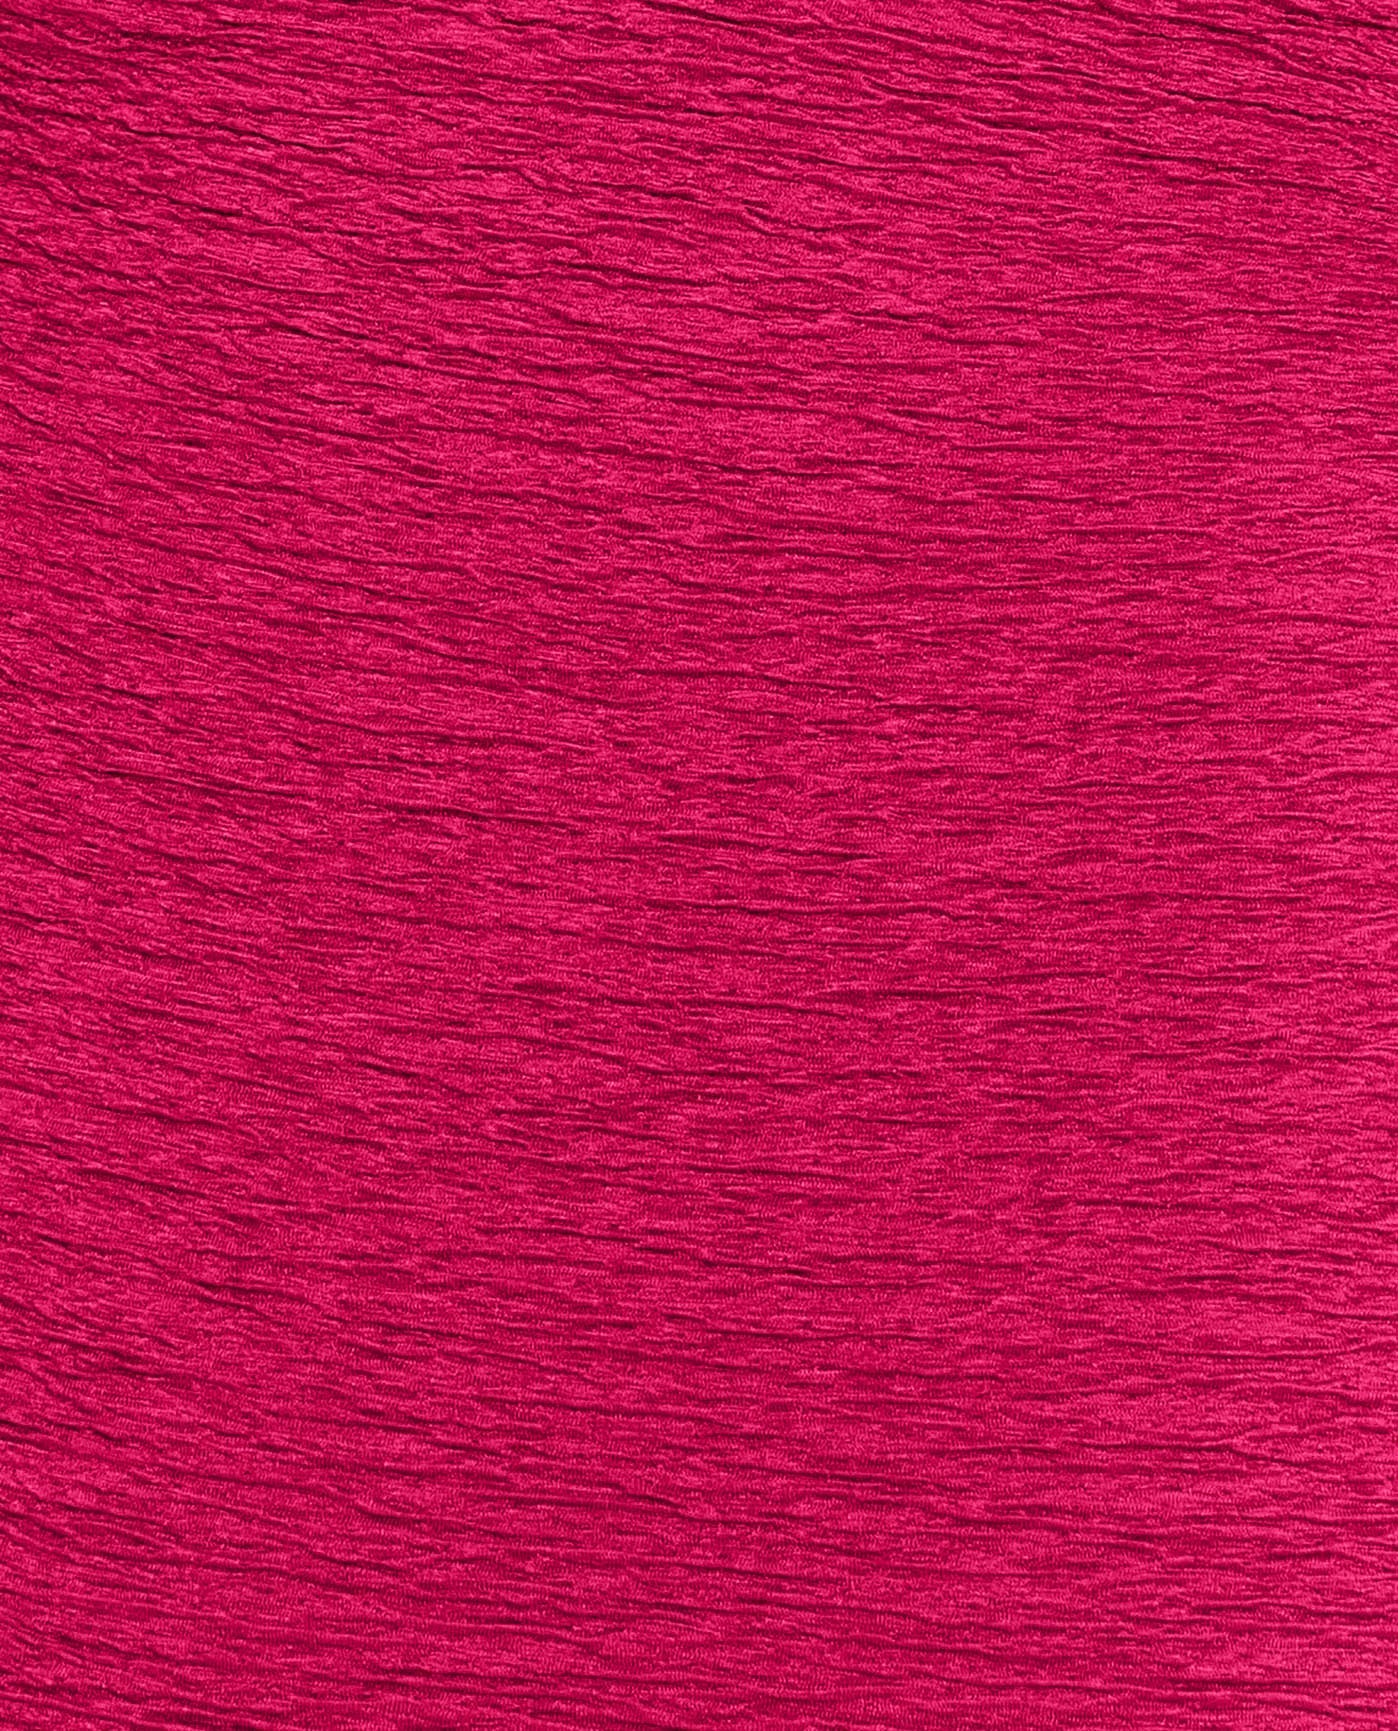 FABRIC SWATCH VIEW OF CHLORINE RESISTANT KRINKLE TEXTURED COLOR BLOCK TWIST FRONT LONG TORSO ONE PIECE | KRINKLE ROSE